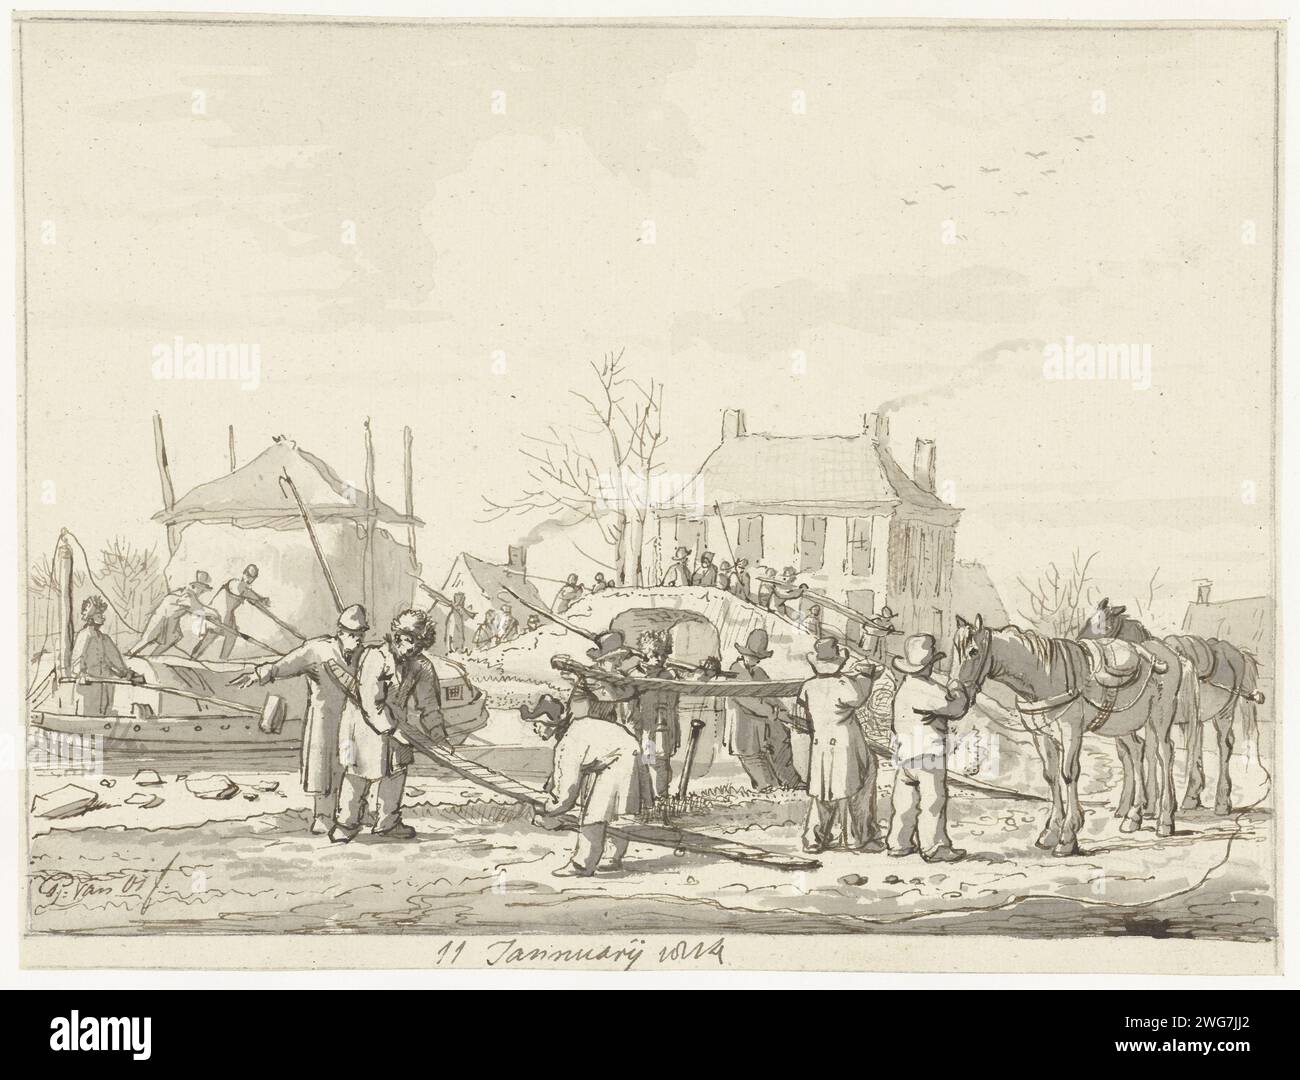 Karnemelksloot in Naarden, January 11, 1814, Pieter Gerardus van Os, 1814 drawing The Karnemelkloot in Naarden, January 11, 1814. Civilians and soldiers are busy with the bridge. On the right a few horses, on the left a hooischuur. Related to the siege of the French troops in Naarden by the Dutch army, with the help of the Cossacks, November 1813 - May 1814. Netherlands paper. ink. pencil pen / brush  Naarden. Buttermilk ditch Stock Photo